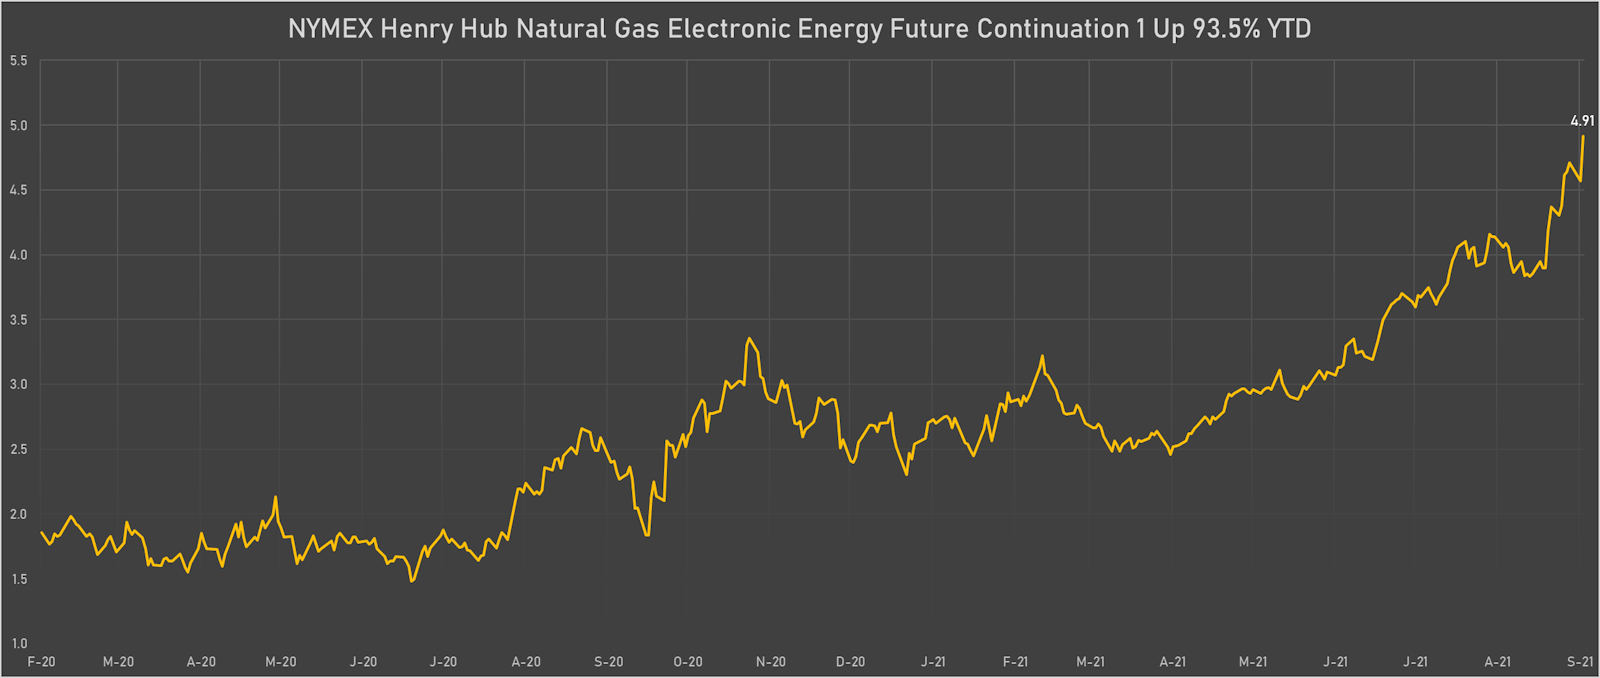 Nat Gas Has Almost Doubled Year To Date | Sources: ϕpost, Refinitiv data